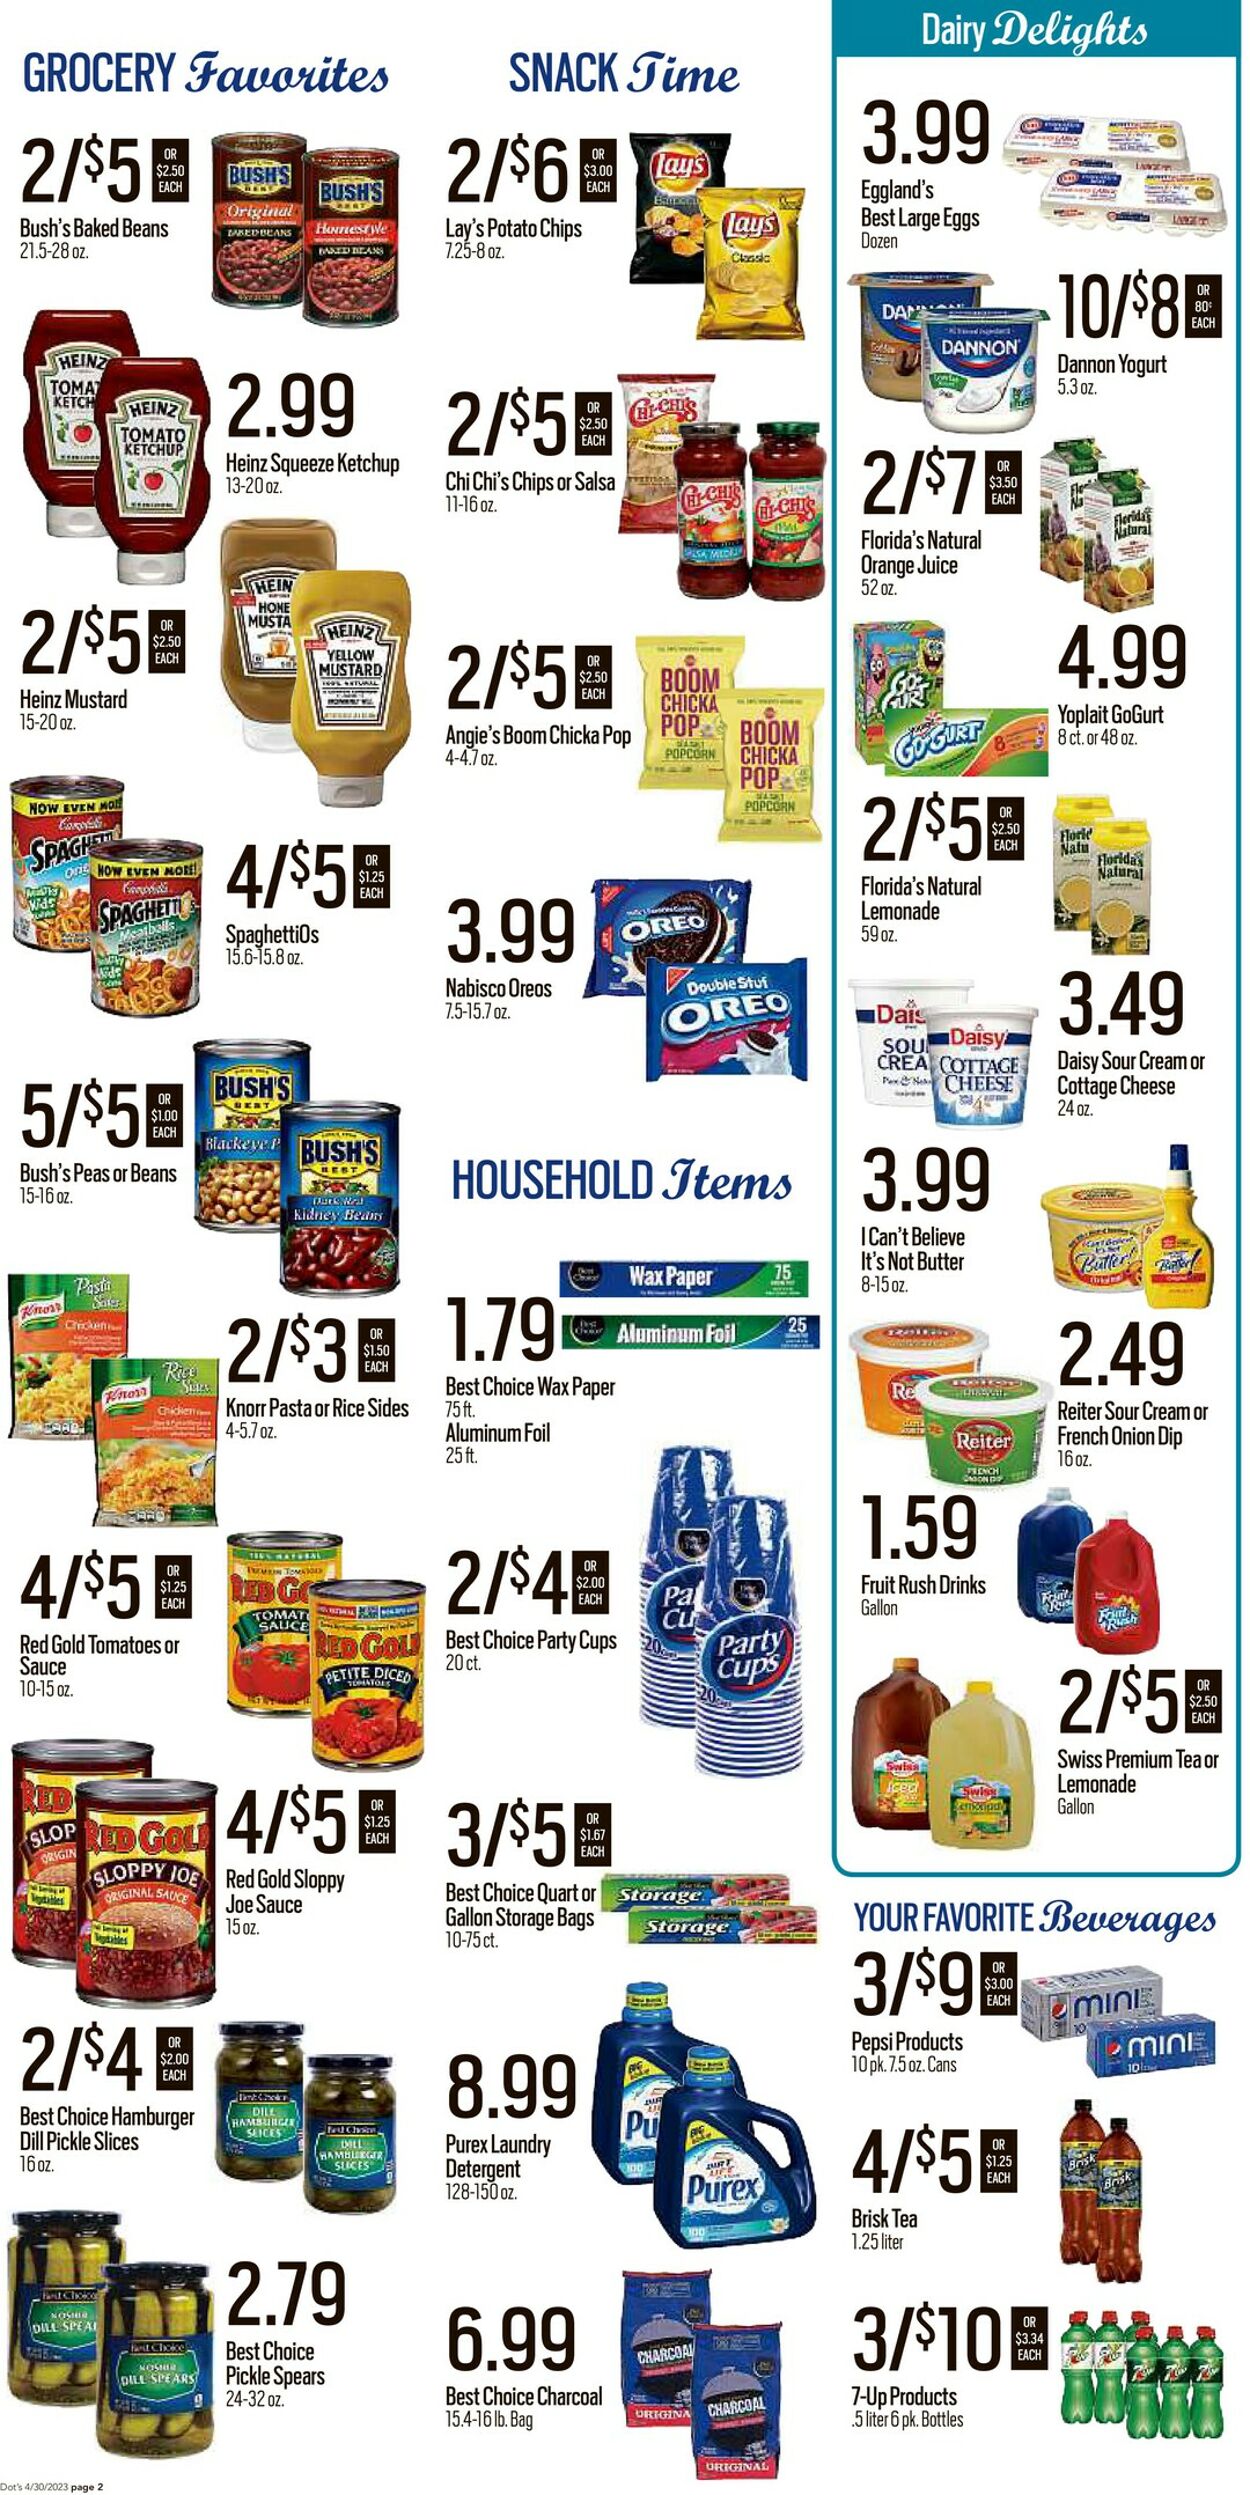 Dot's Market Ad from 05/01/2023